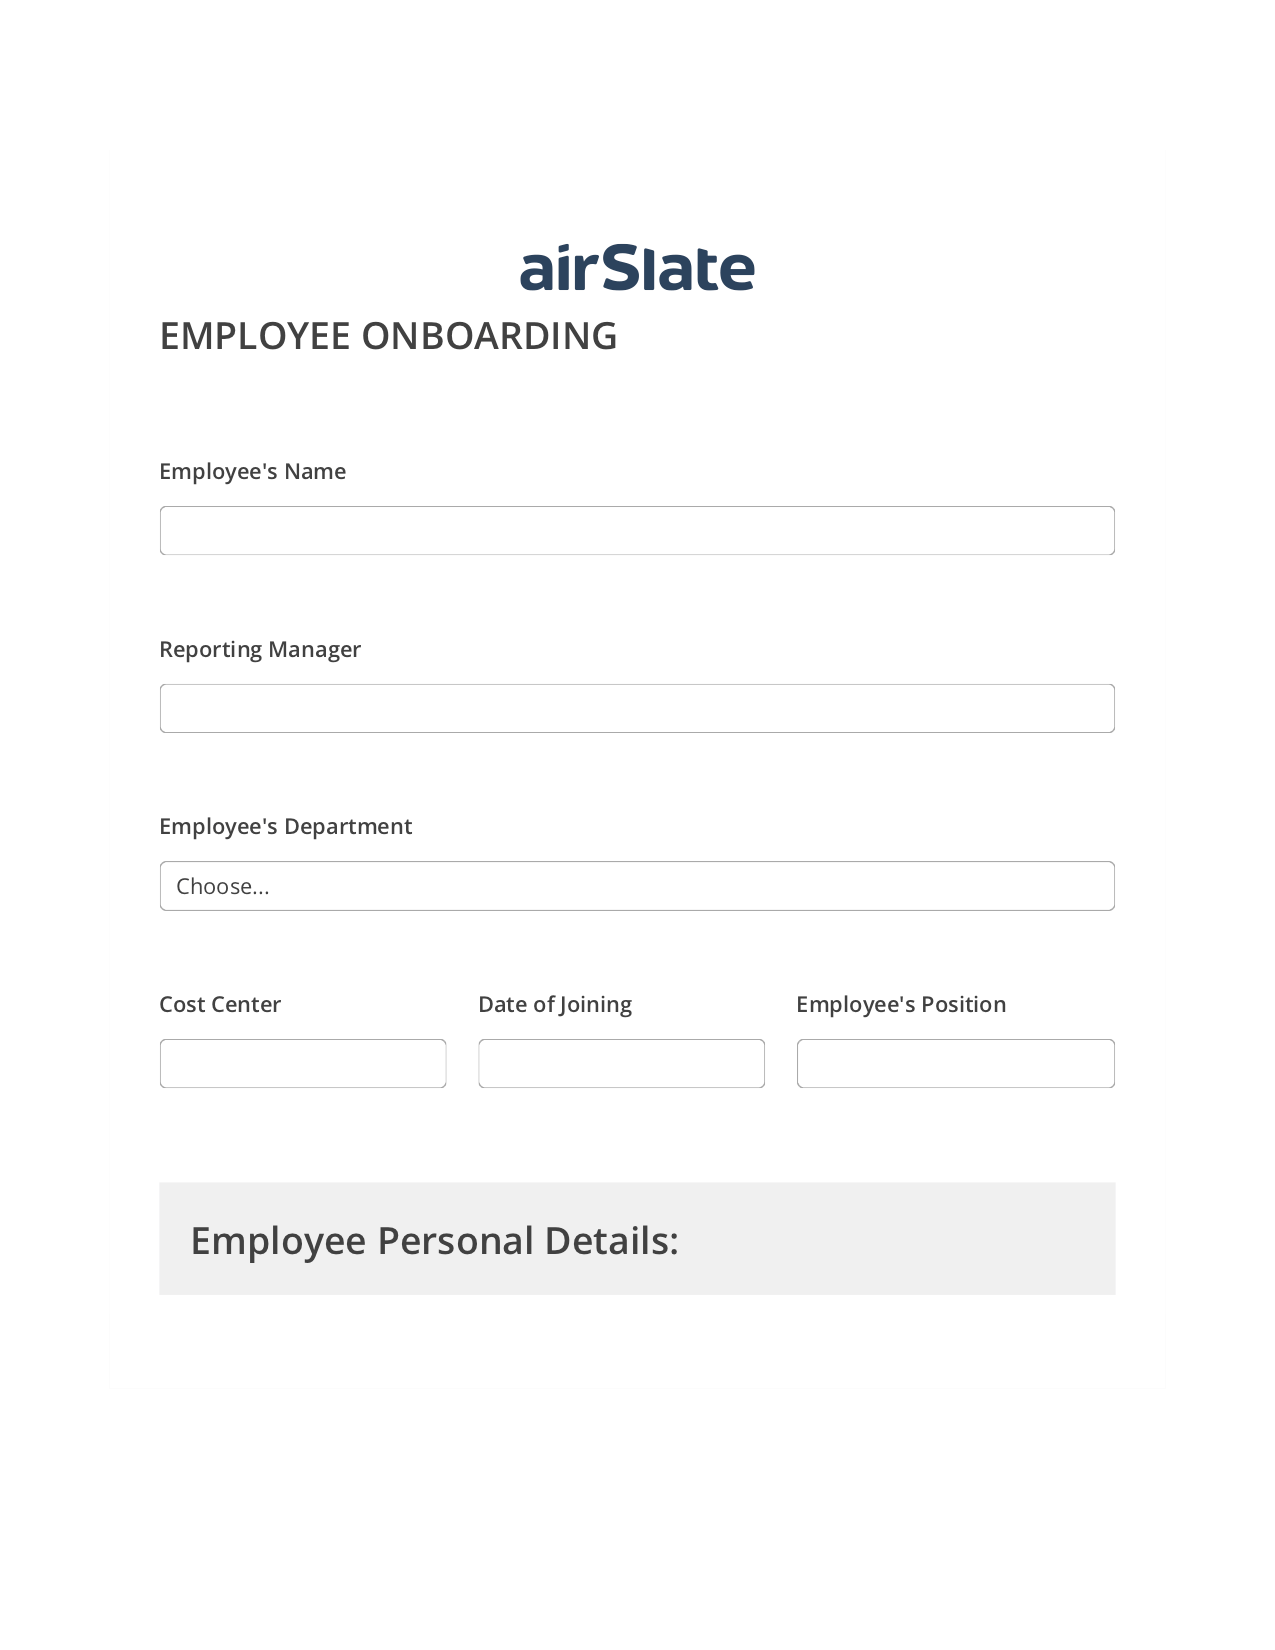 Employee Onboarding Workflow Pre-fill Slate from MS Dynamics 365 record, Remove Tags From Slate Bot, Webhook Postfinish Bot